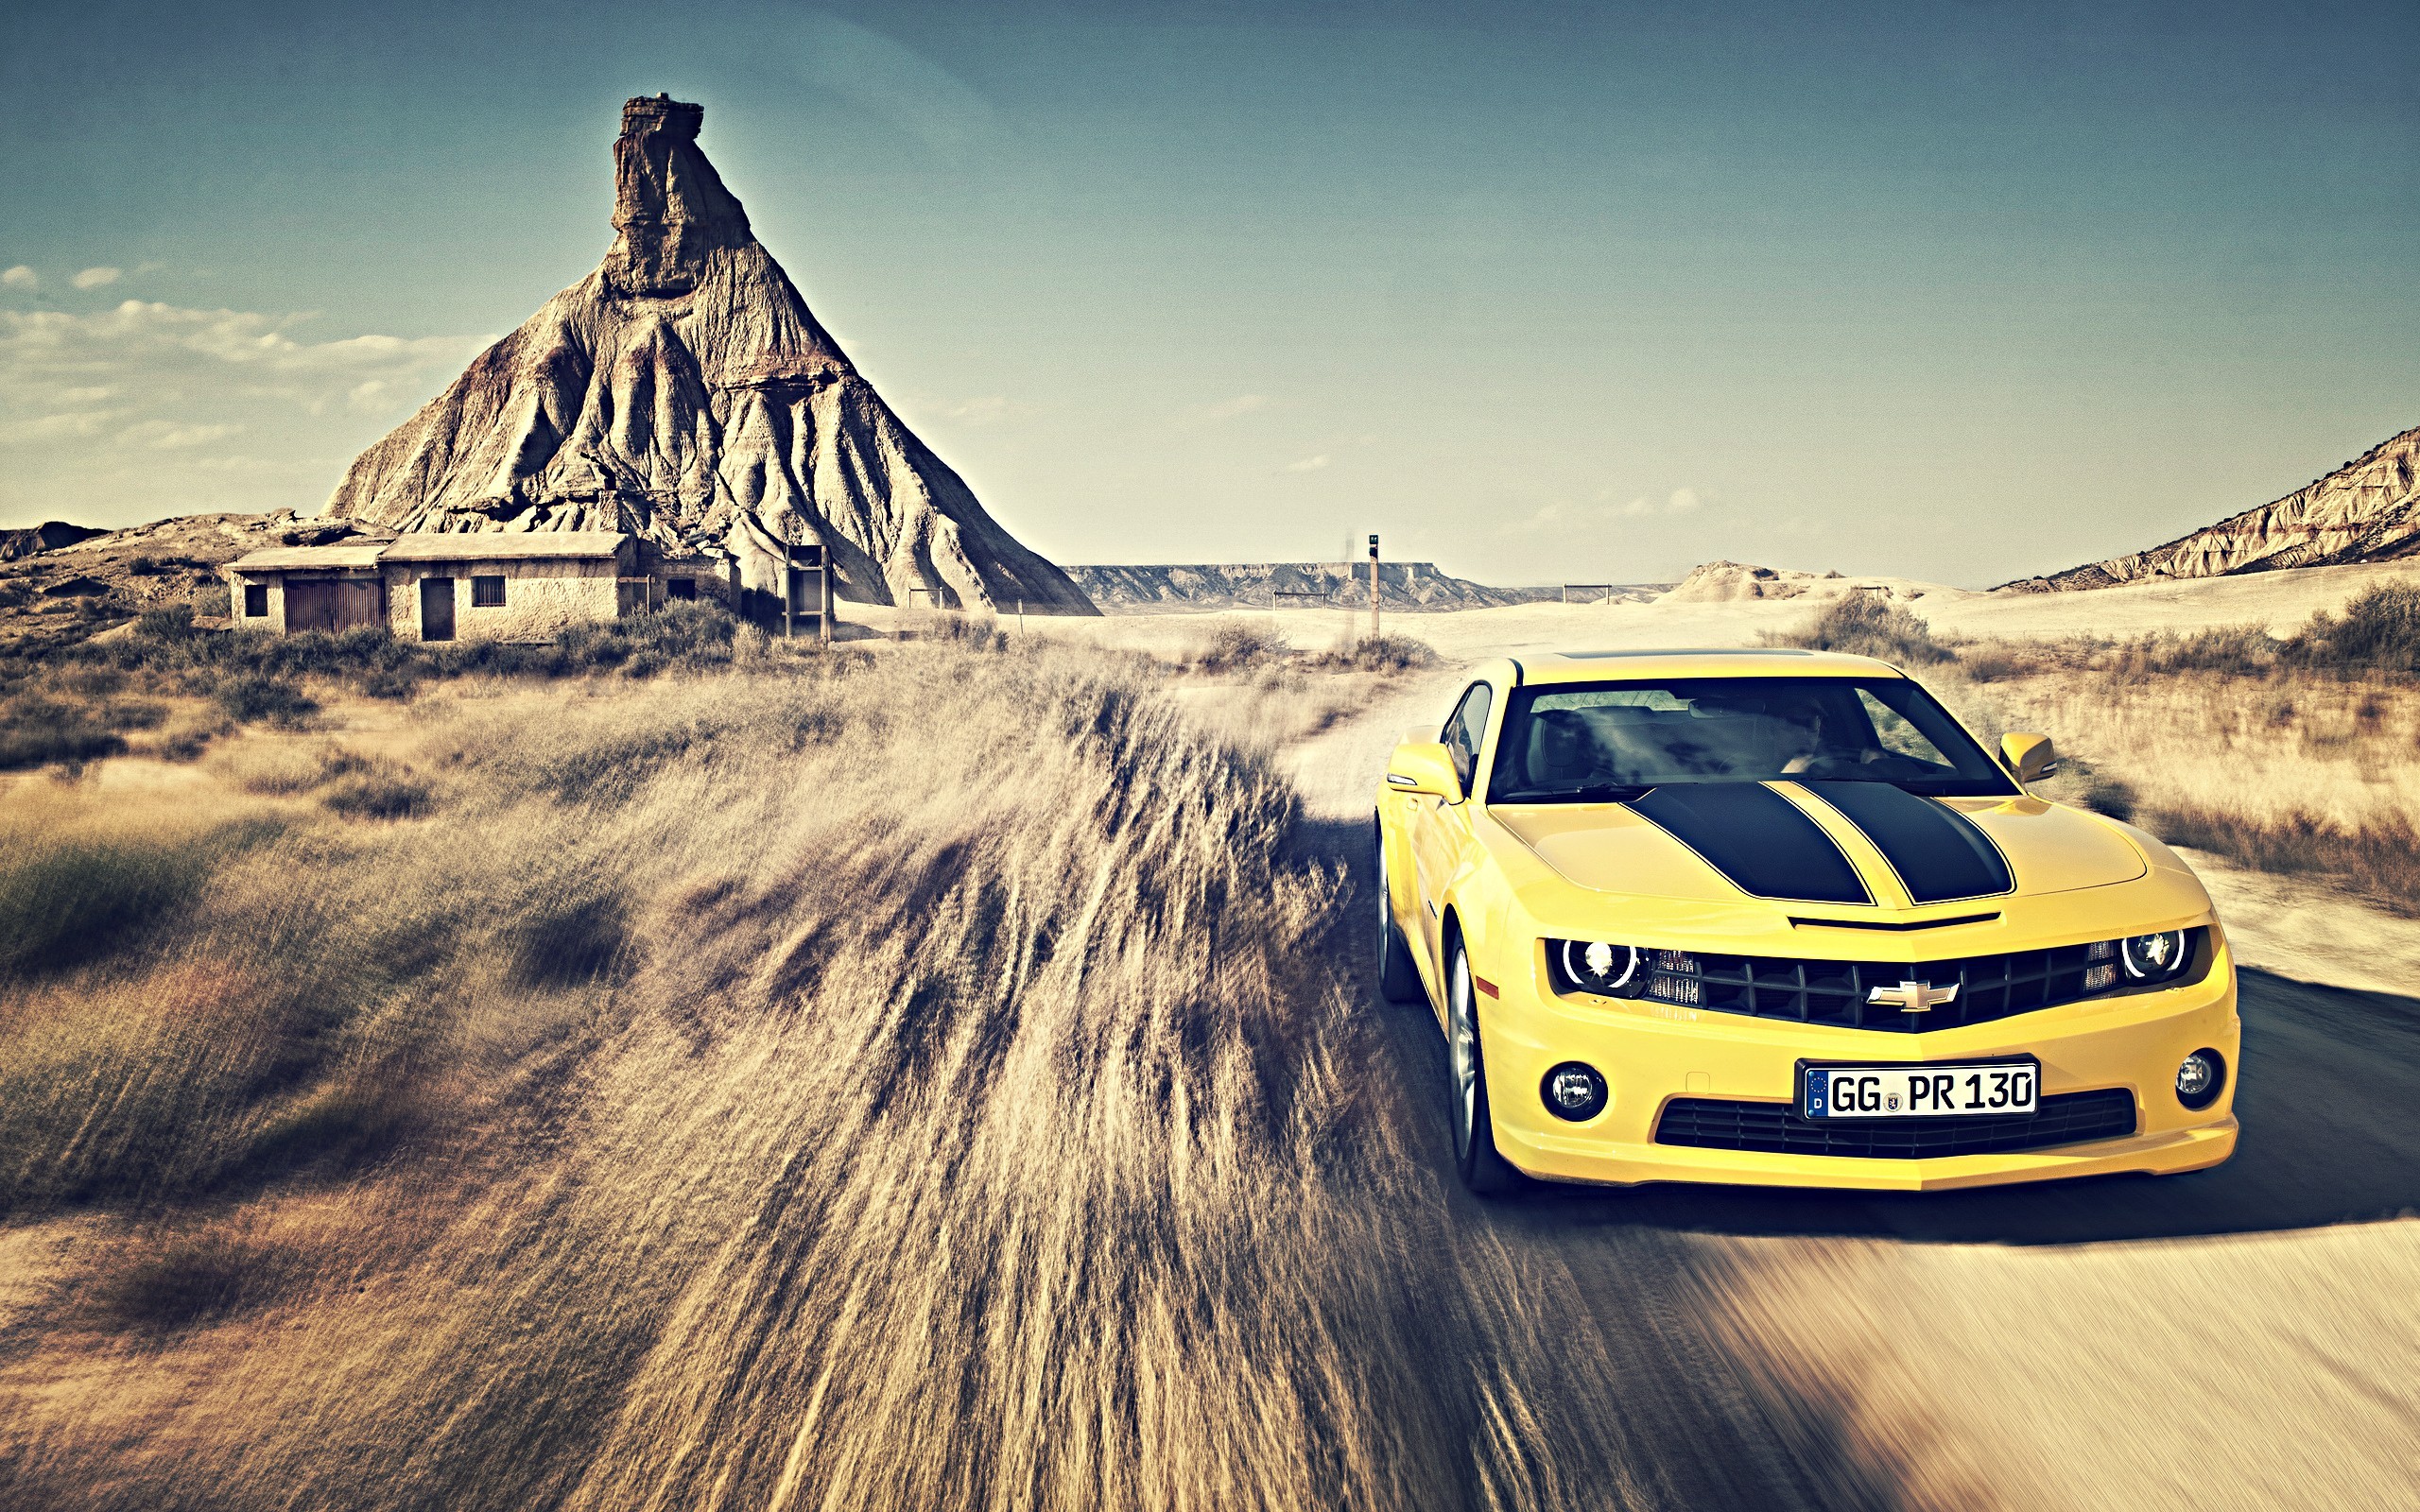 General 2560x1600 car Chevrolet Chevrolet Camaro racing stripes yellow cars vehicle muscle cars American cars